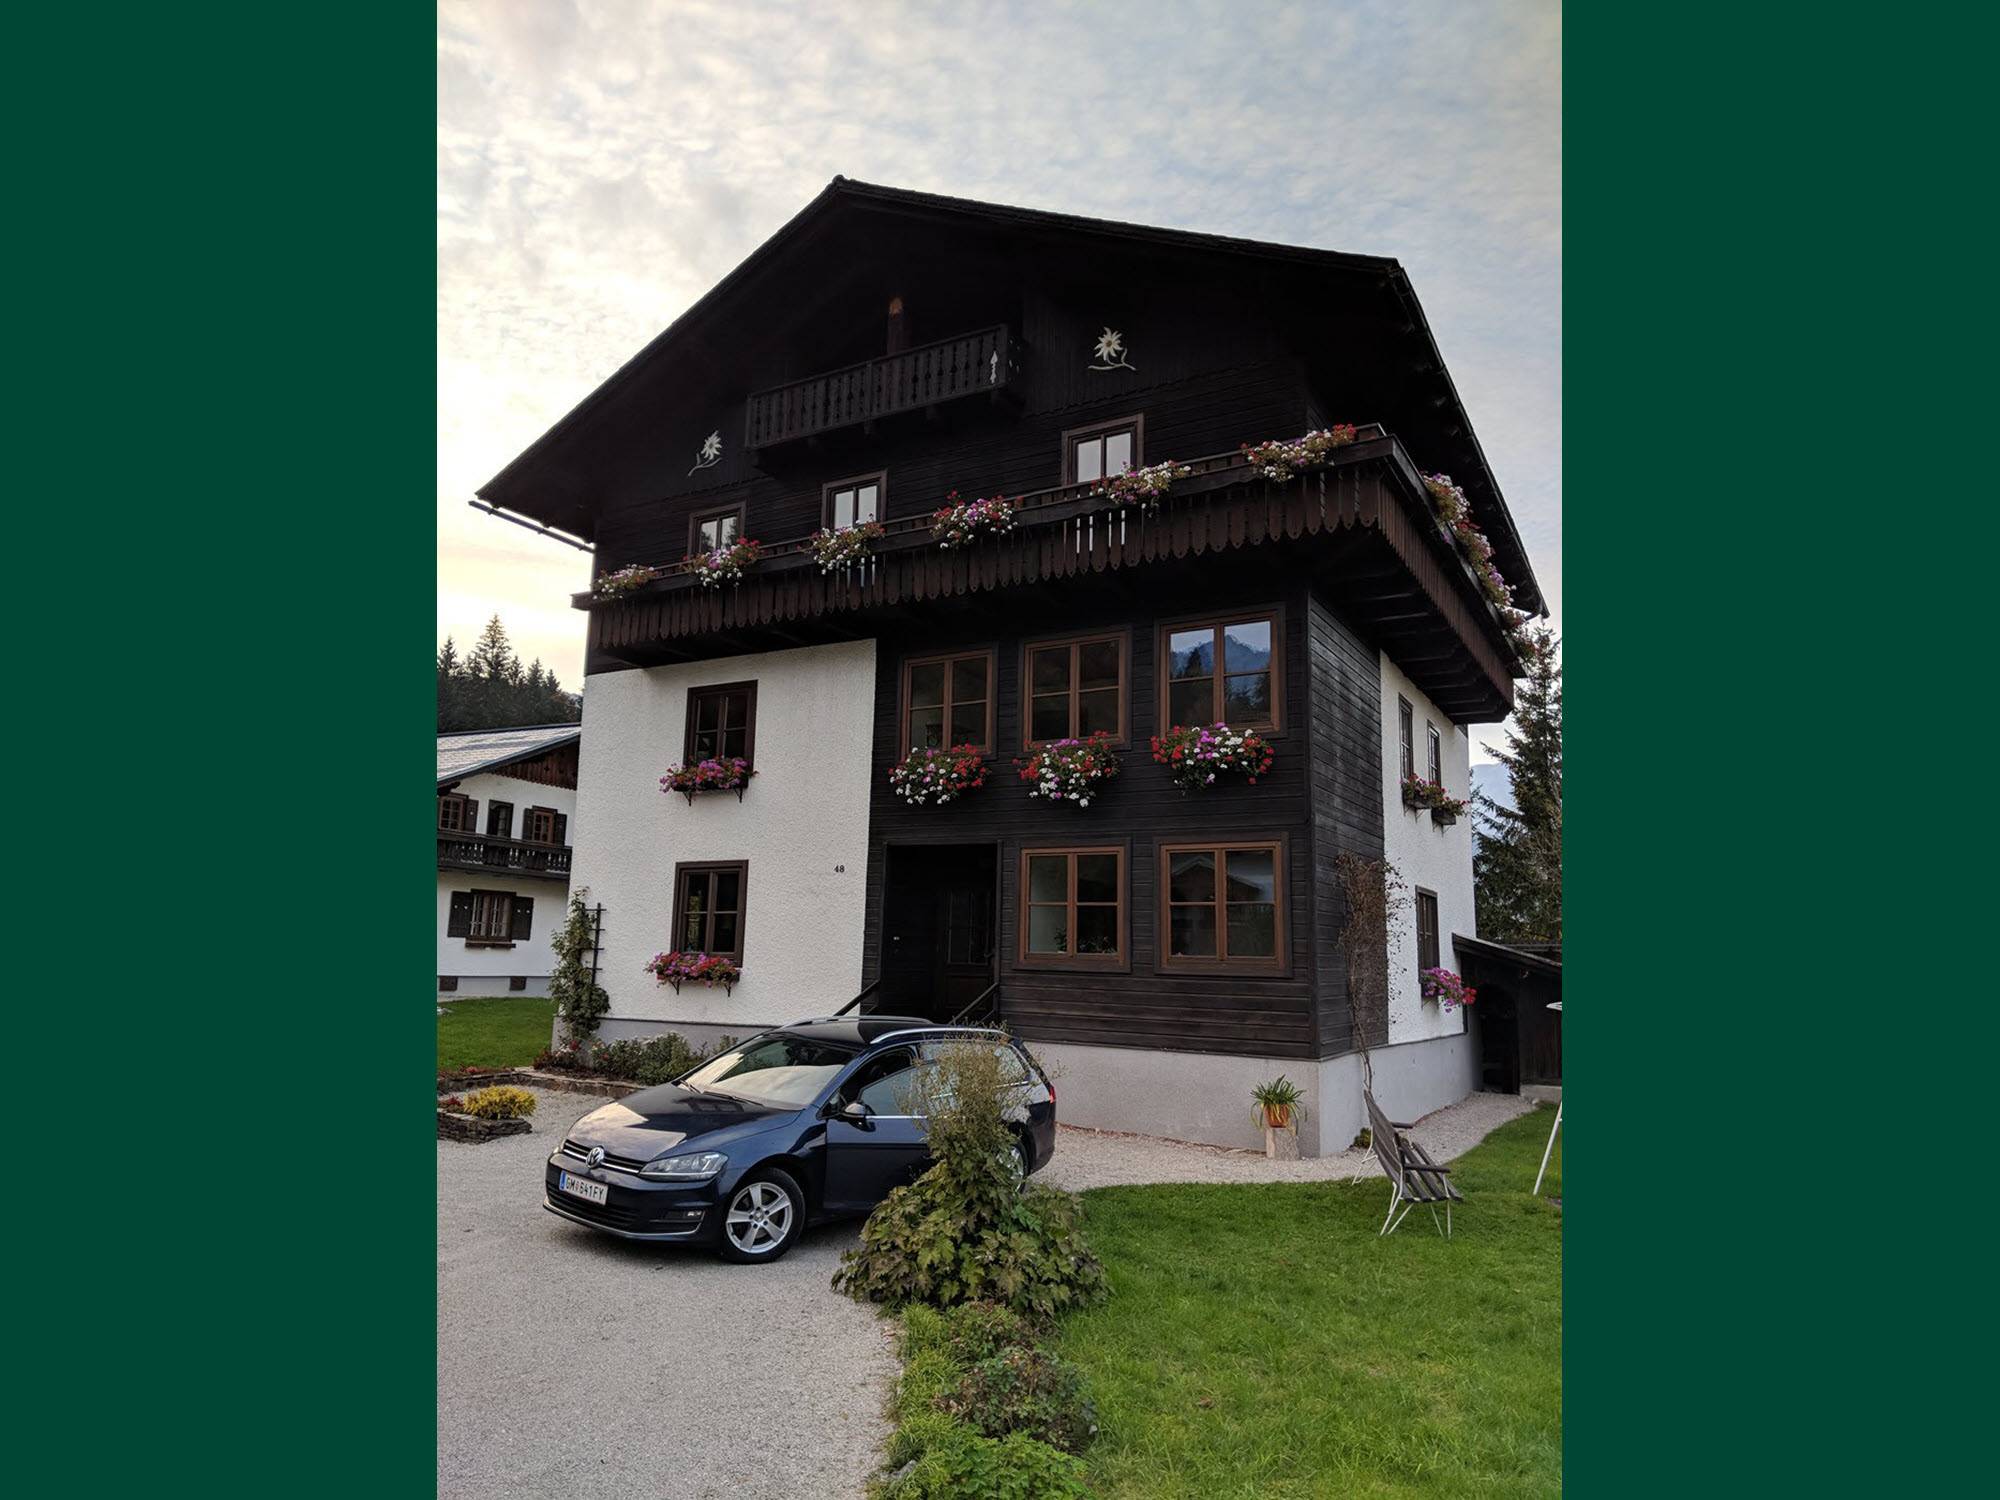 Haus Edelweiss Autumn 2018 Front View